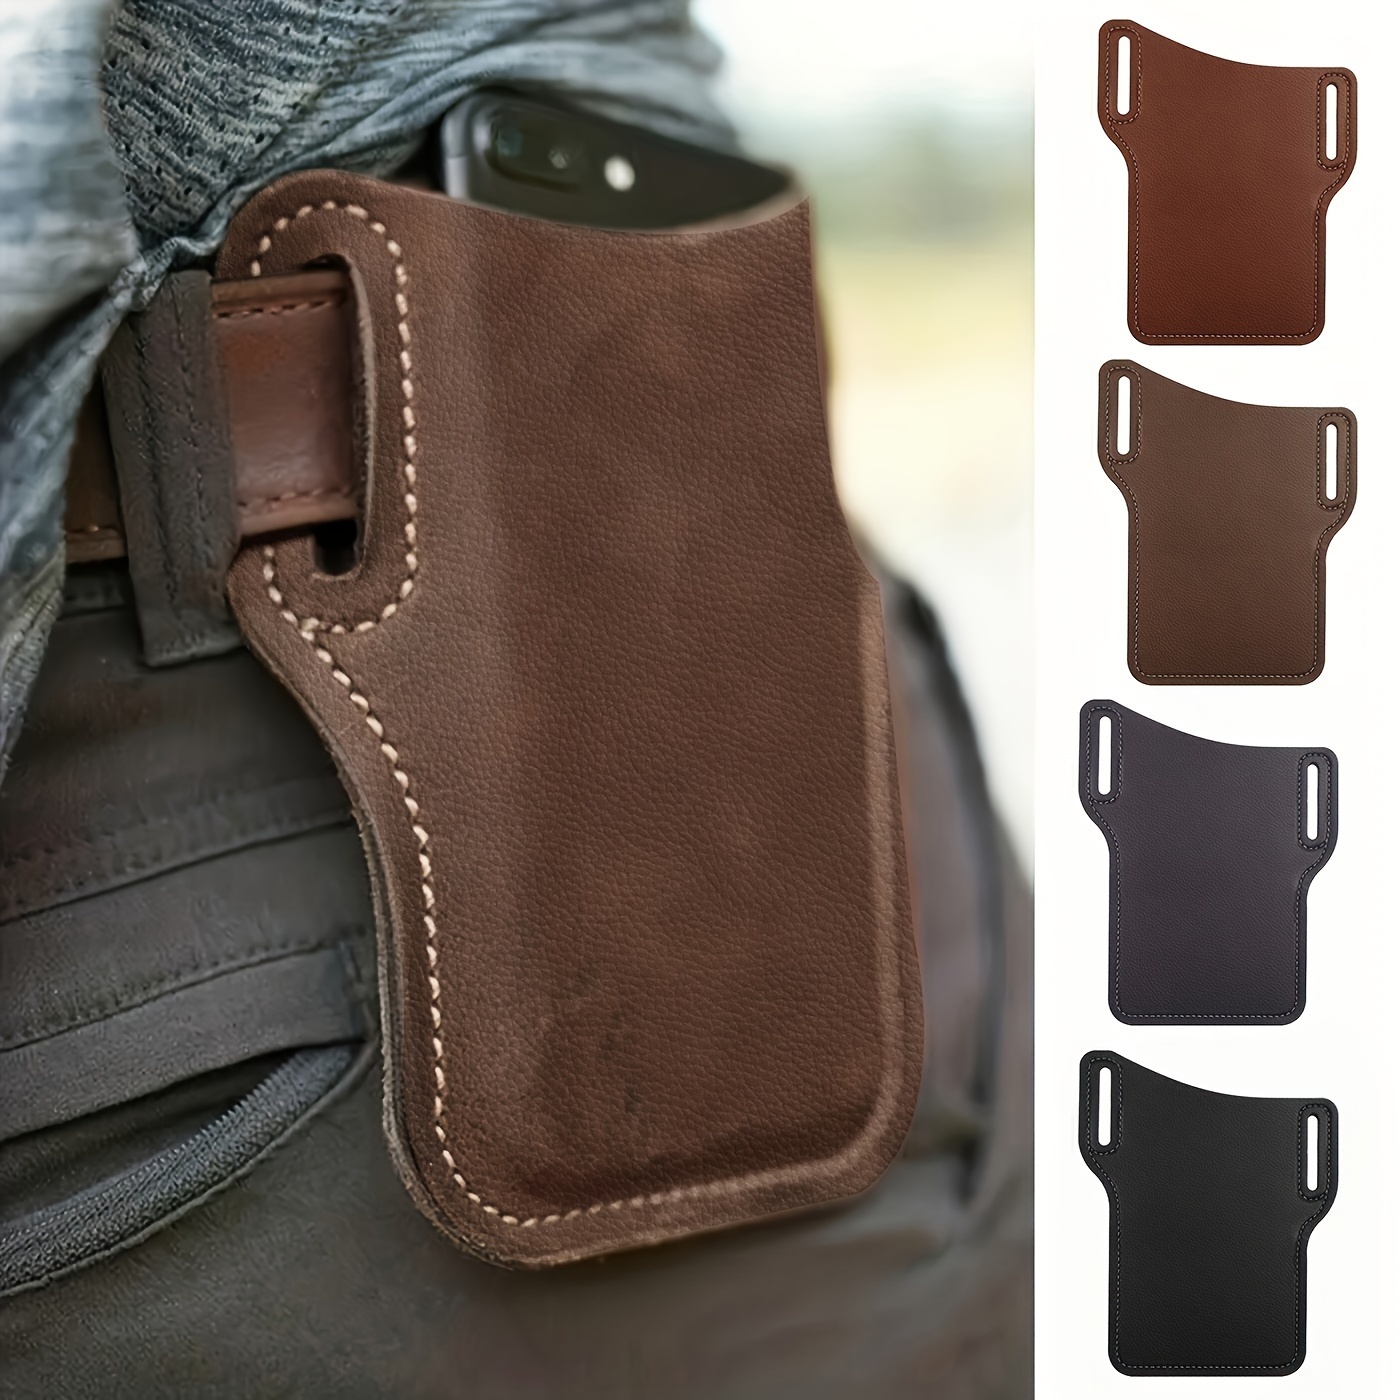 

1pc Durable Faux Leather Phone Case For Men - Perfect For Outdoor Sports, Running, Travel, Camping, And Hiking